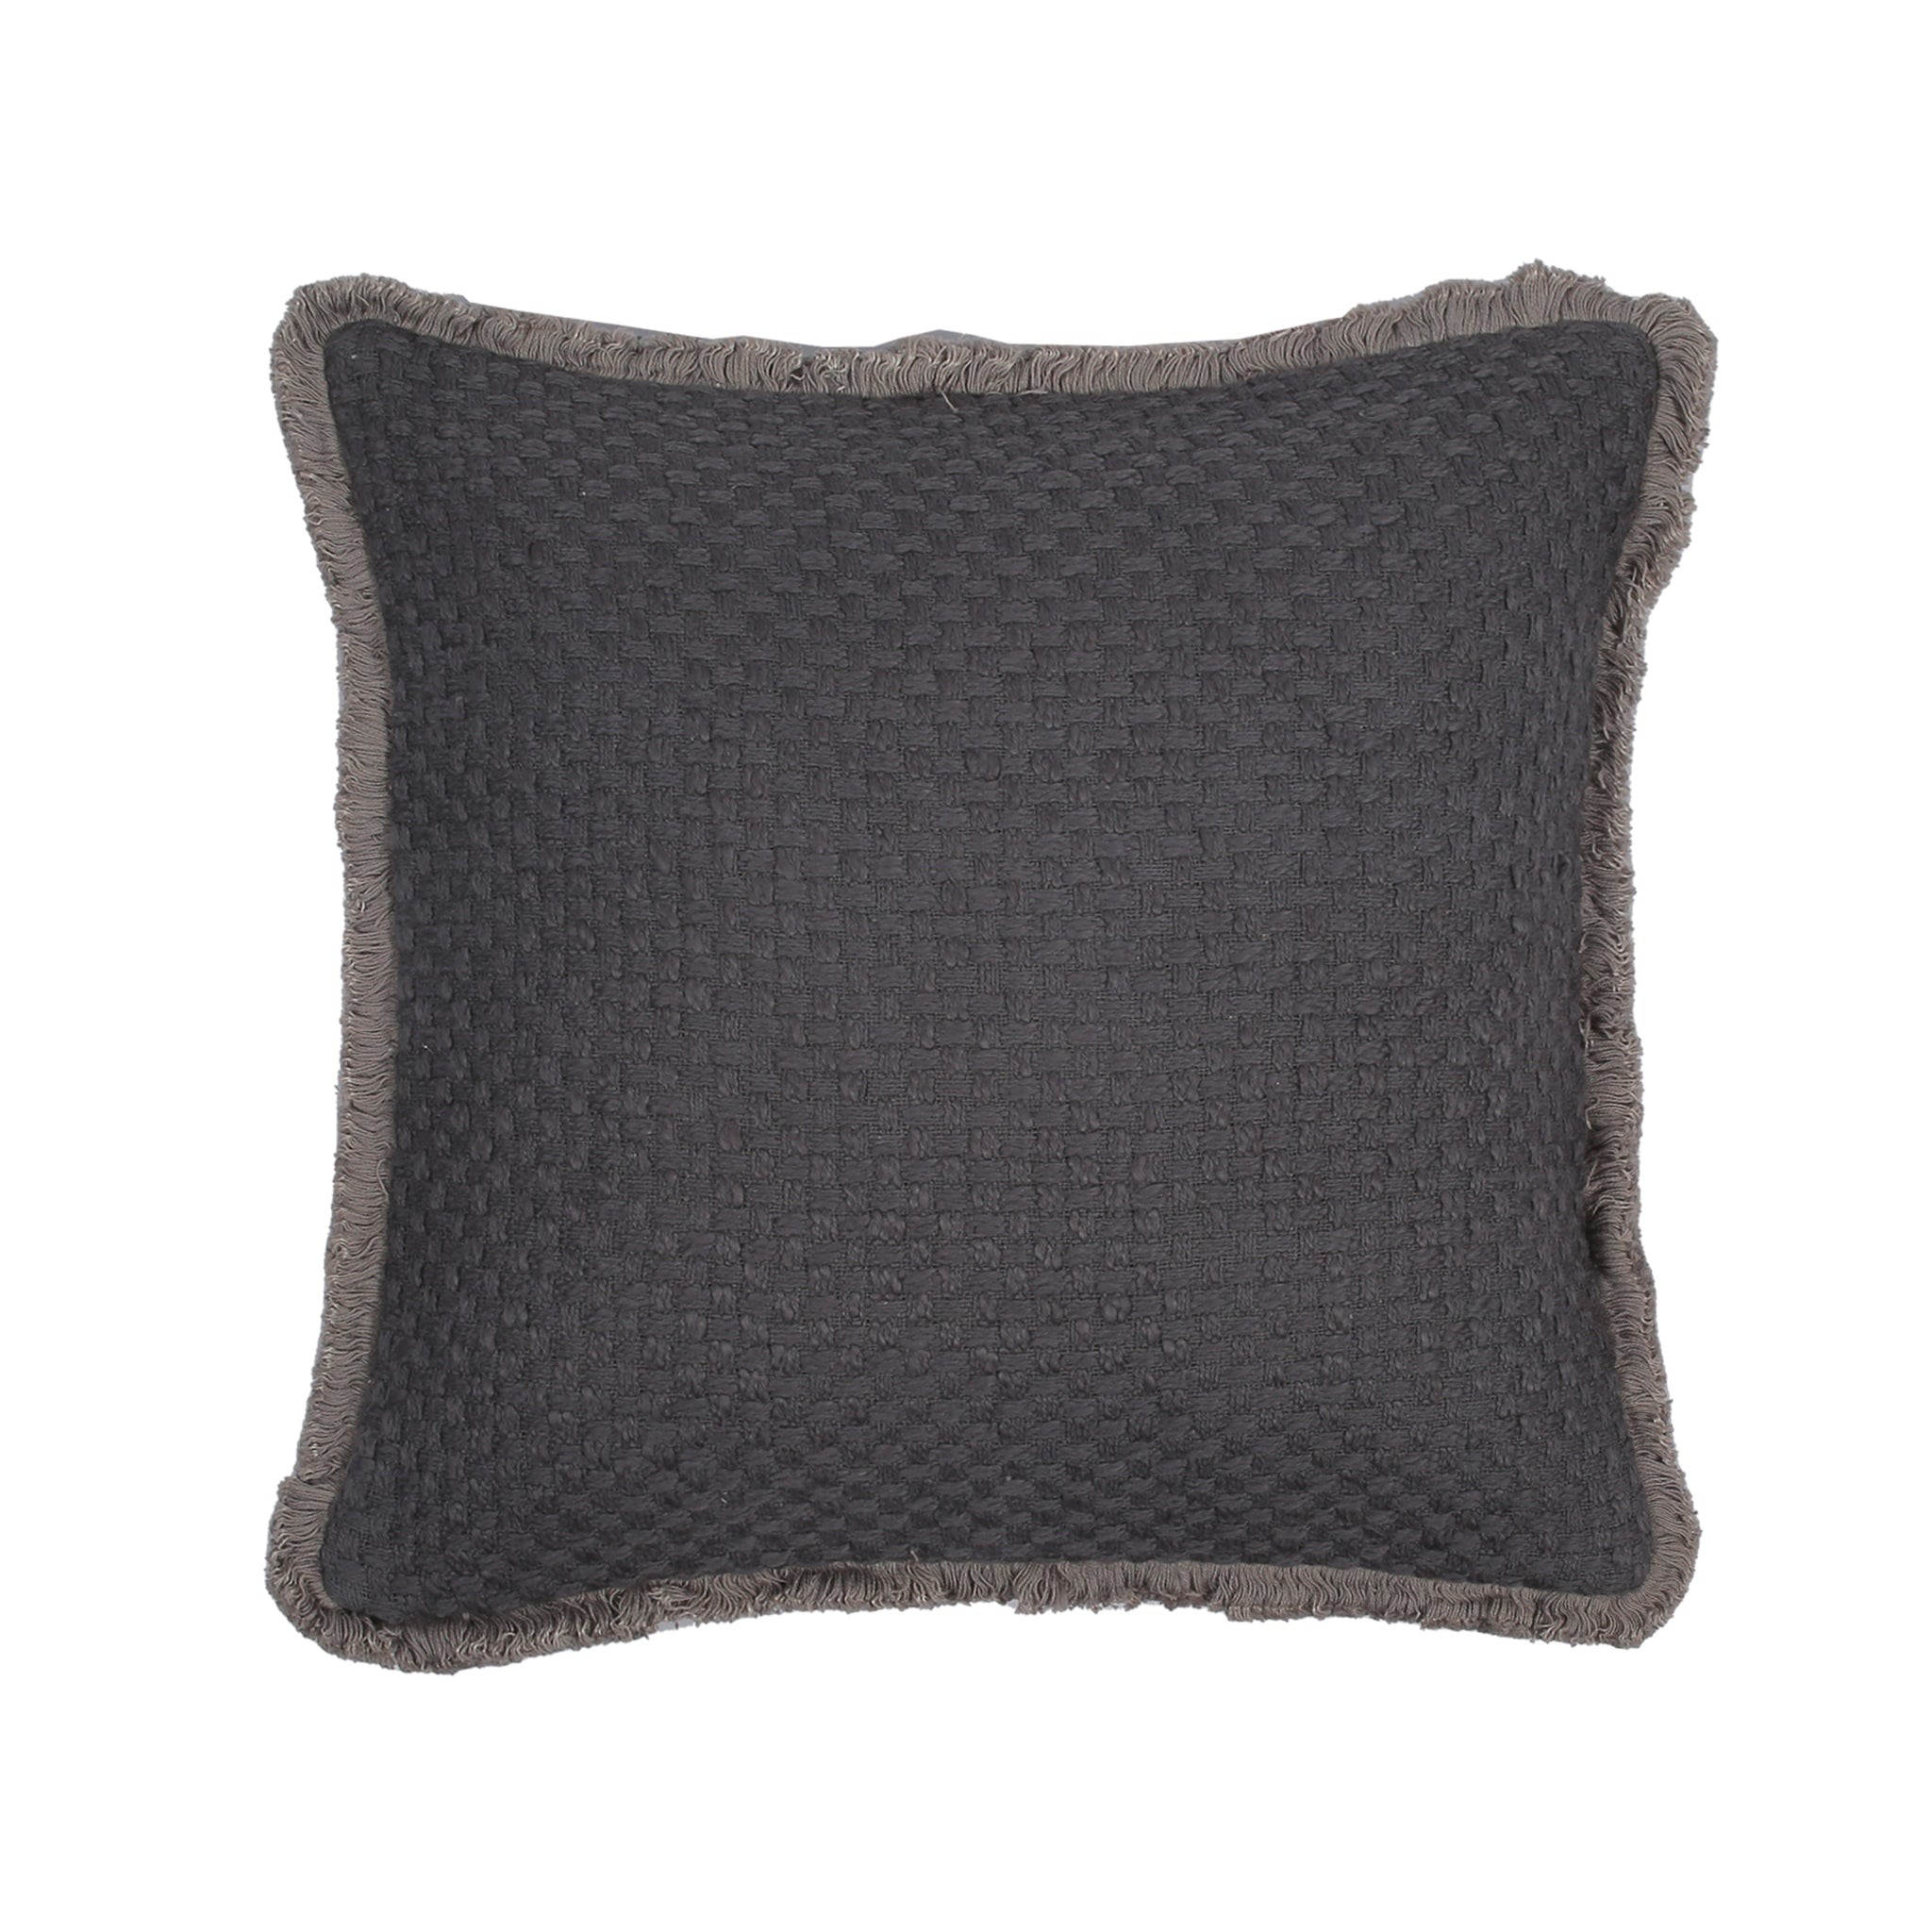 Cushion Cover - Plain Dyed Charcoal